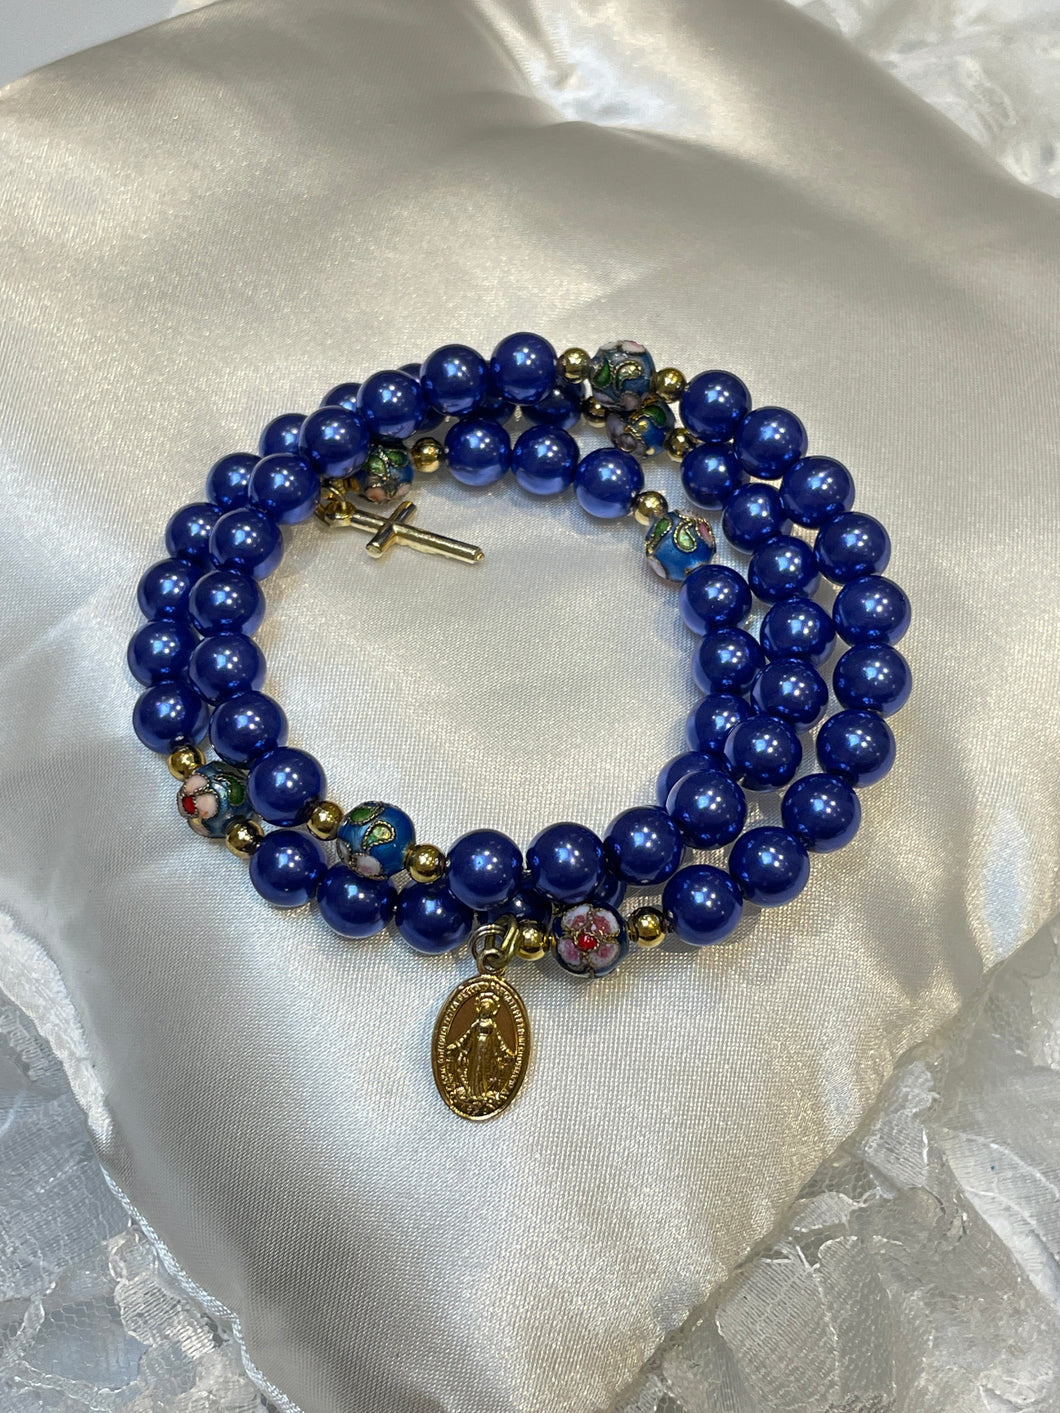 Navy Blue Pearl Rosary Bracelet with Miraculous Medal and Cross Charms